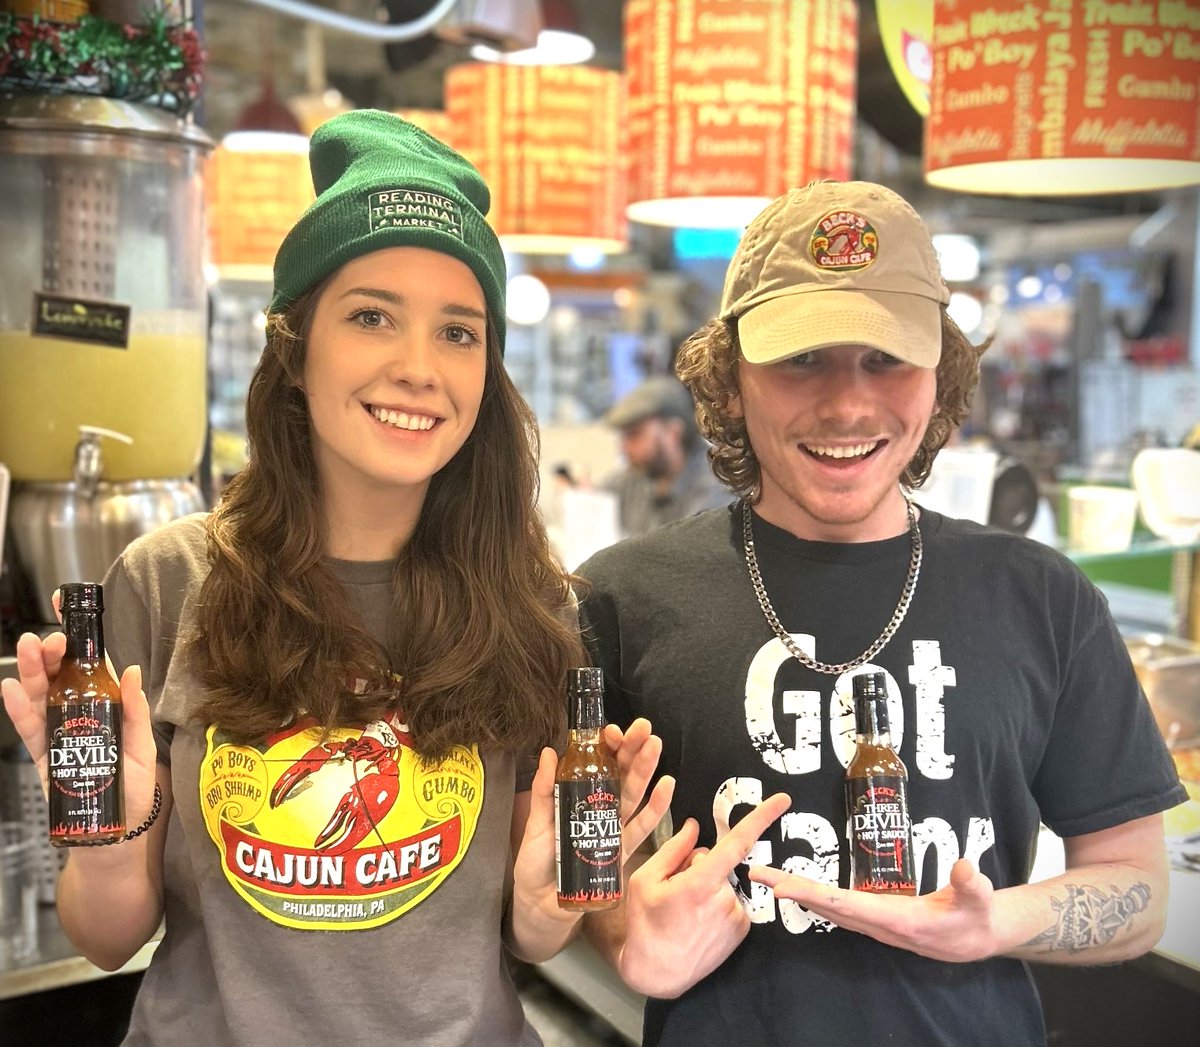 Throughout March purchase a Beck's T-shirt & Beck's Hat & score a FREE Devils Dust Hot Sauce (PHILLY'S FAVE HEATONIST HOT SAUCE!)  🔥🔥🔥
#phillyflowershow #flowershow #hotsauce #cajun #lovertm #paconventioncenter #phillyeats #bestfoodphilly #eaterphilly #eatlocal #philly